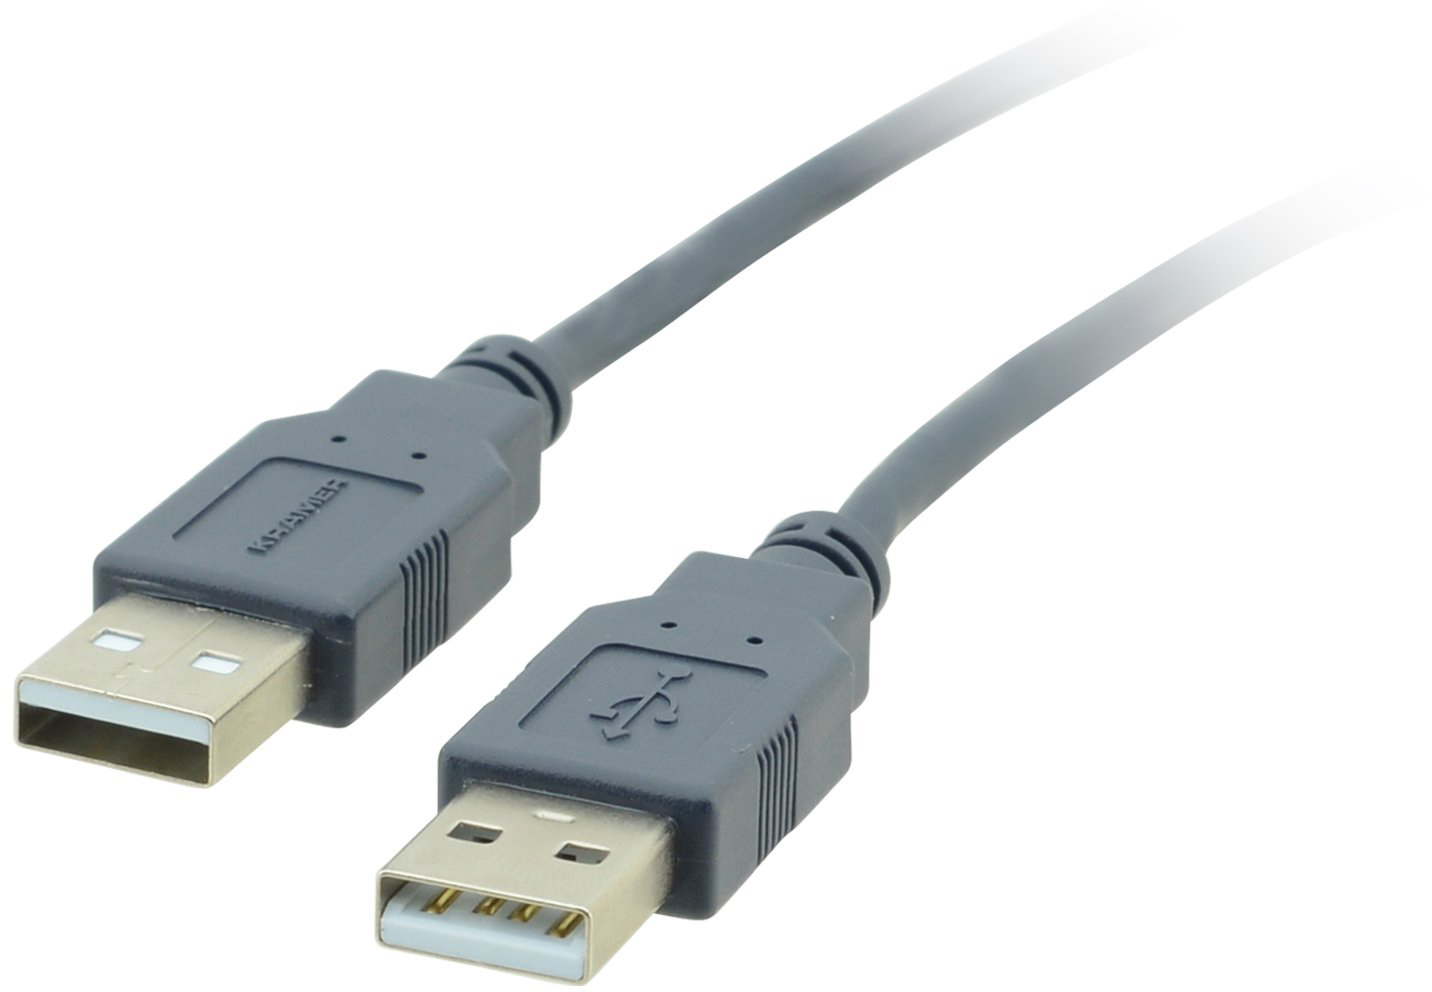 Kramer USB 2.0 A (M) to A (M) Cable